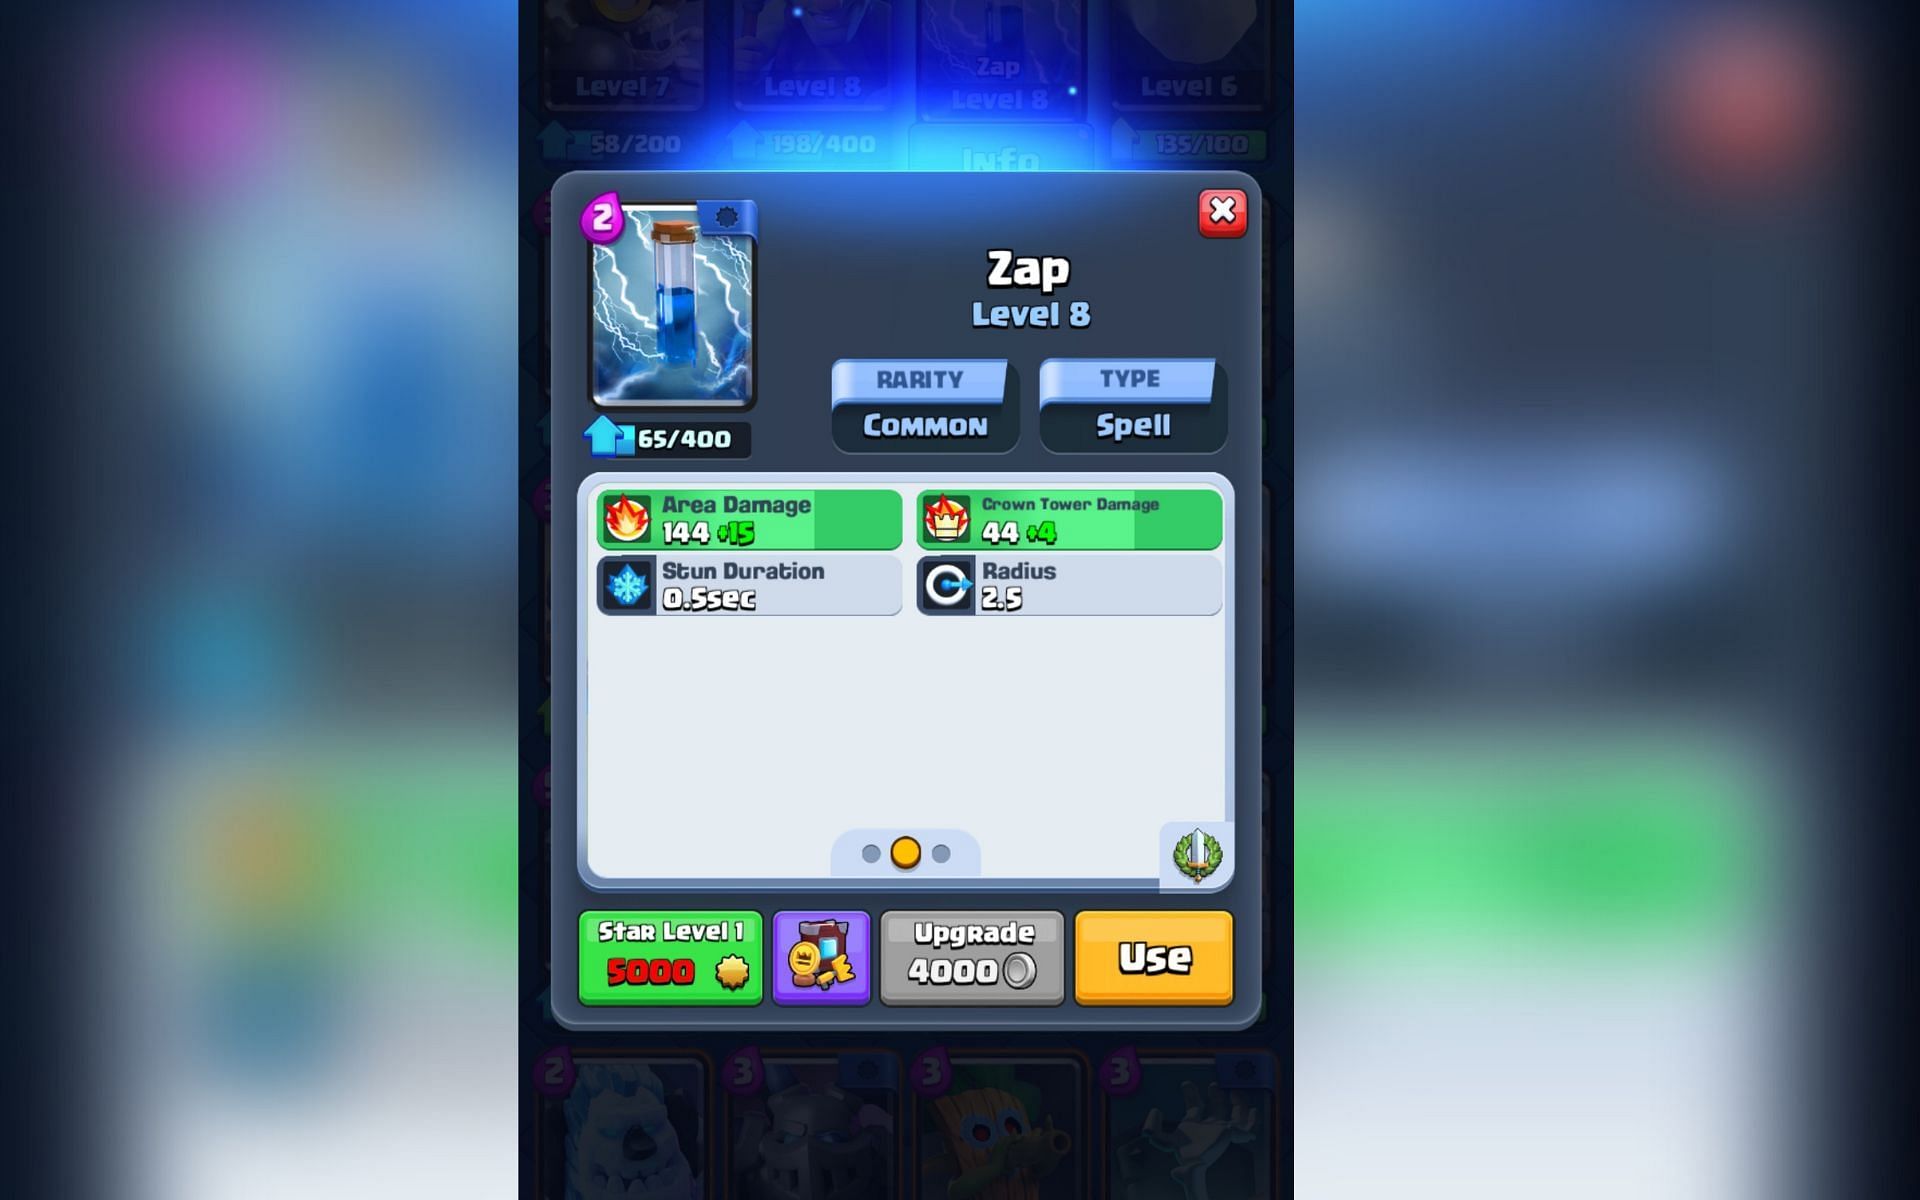 What is the best deck to beat mid-ladder in Clash Royale?